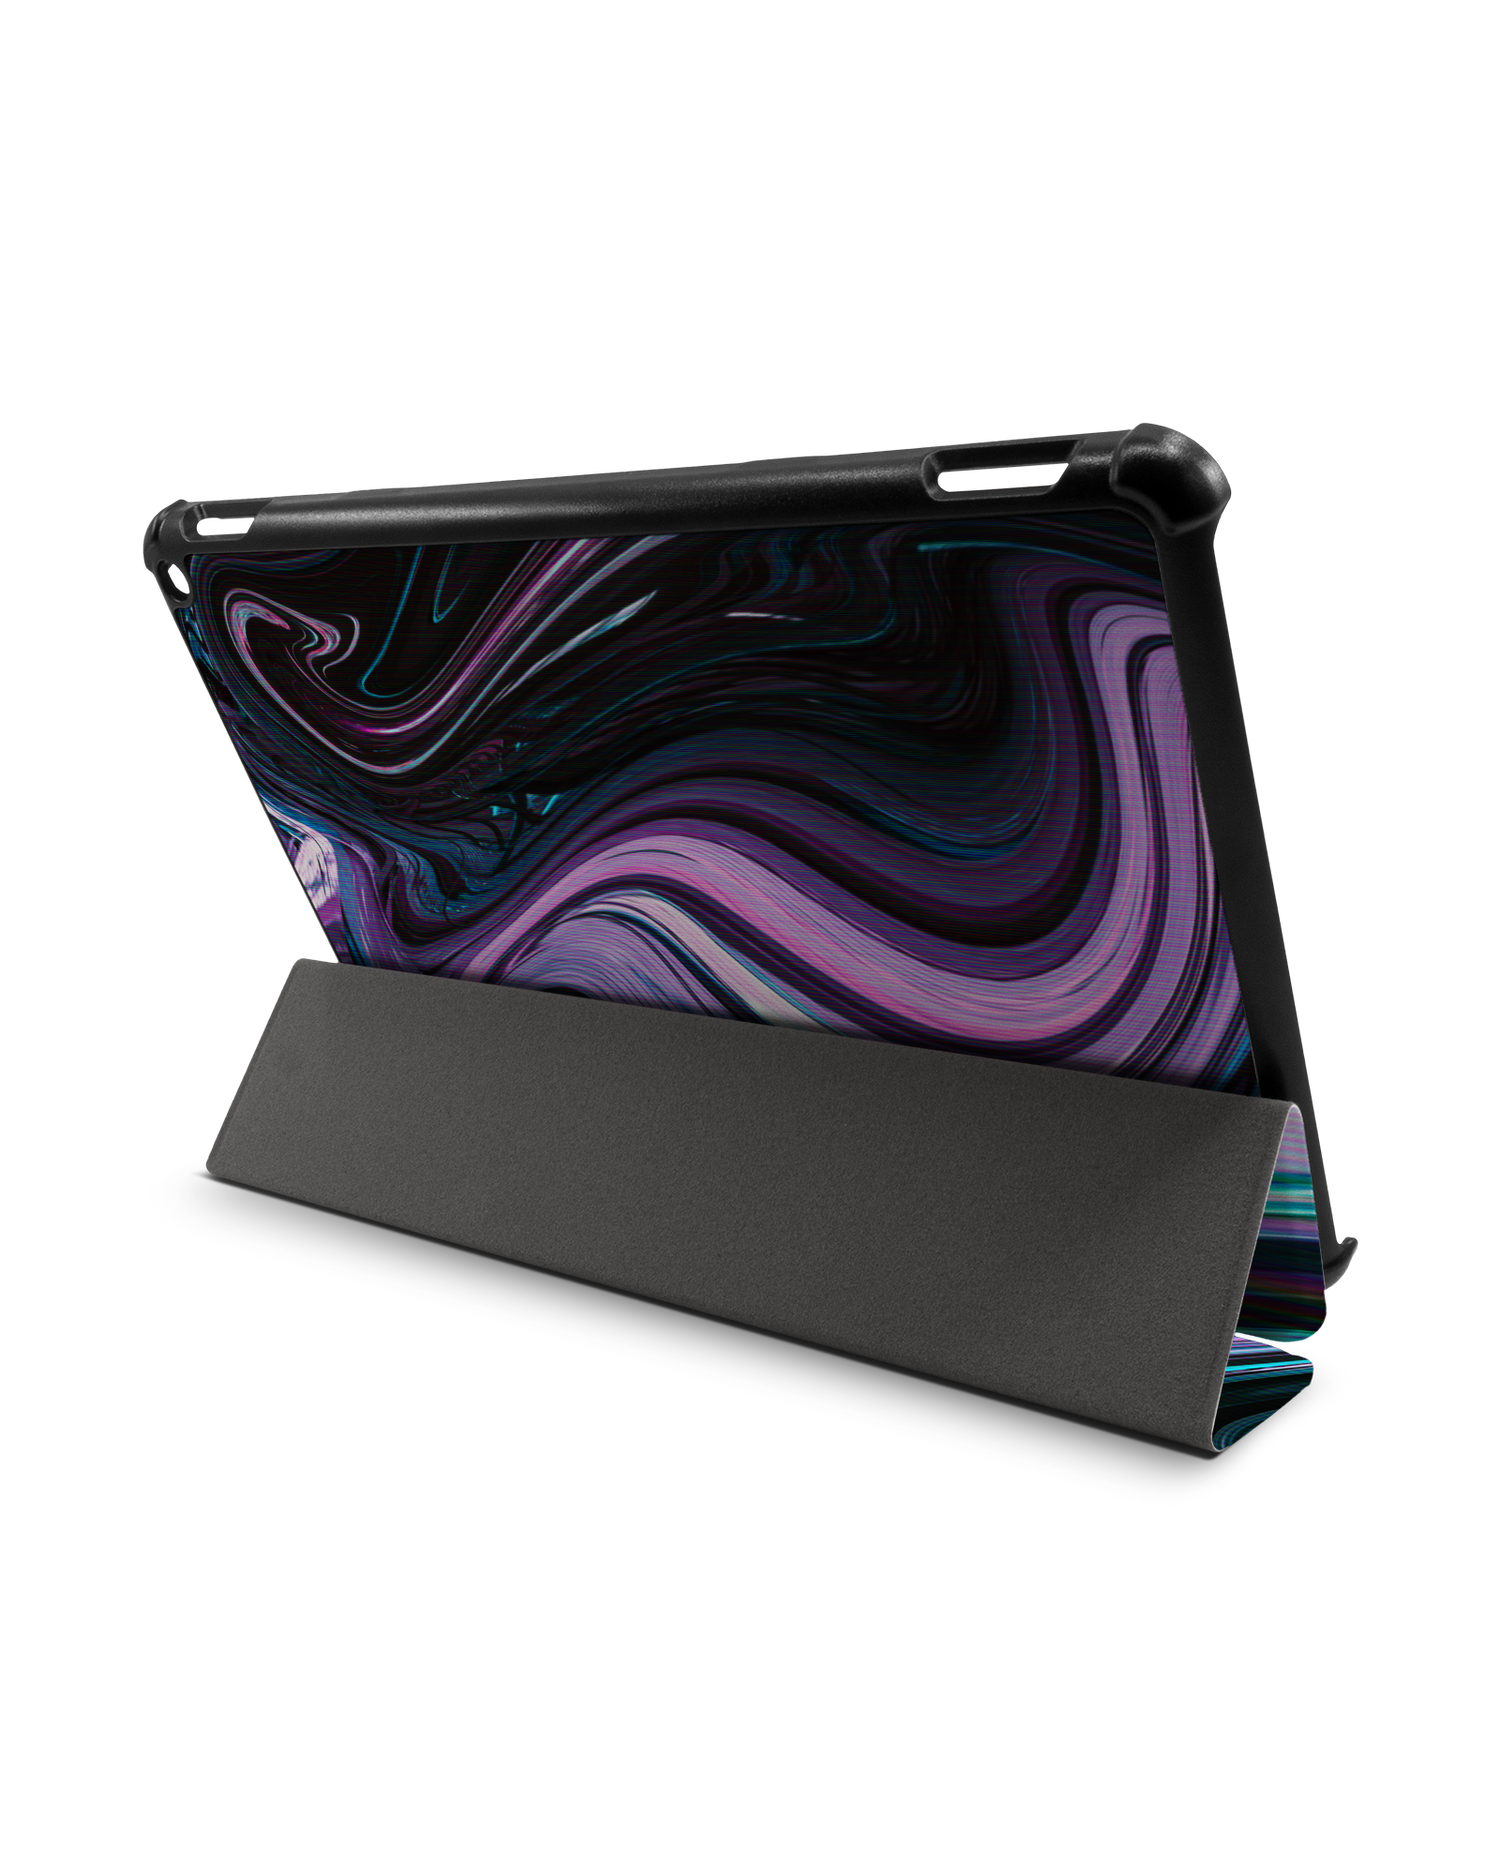 Digital Swirl Tablet Smart Case for Amazon Fire HD 10 (2021): Used as Stand